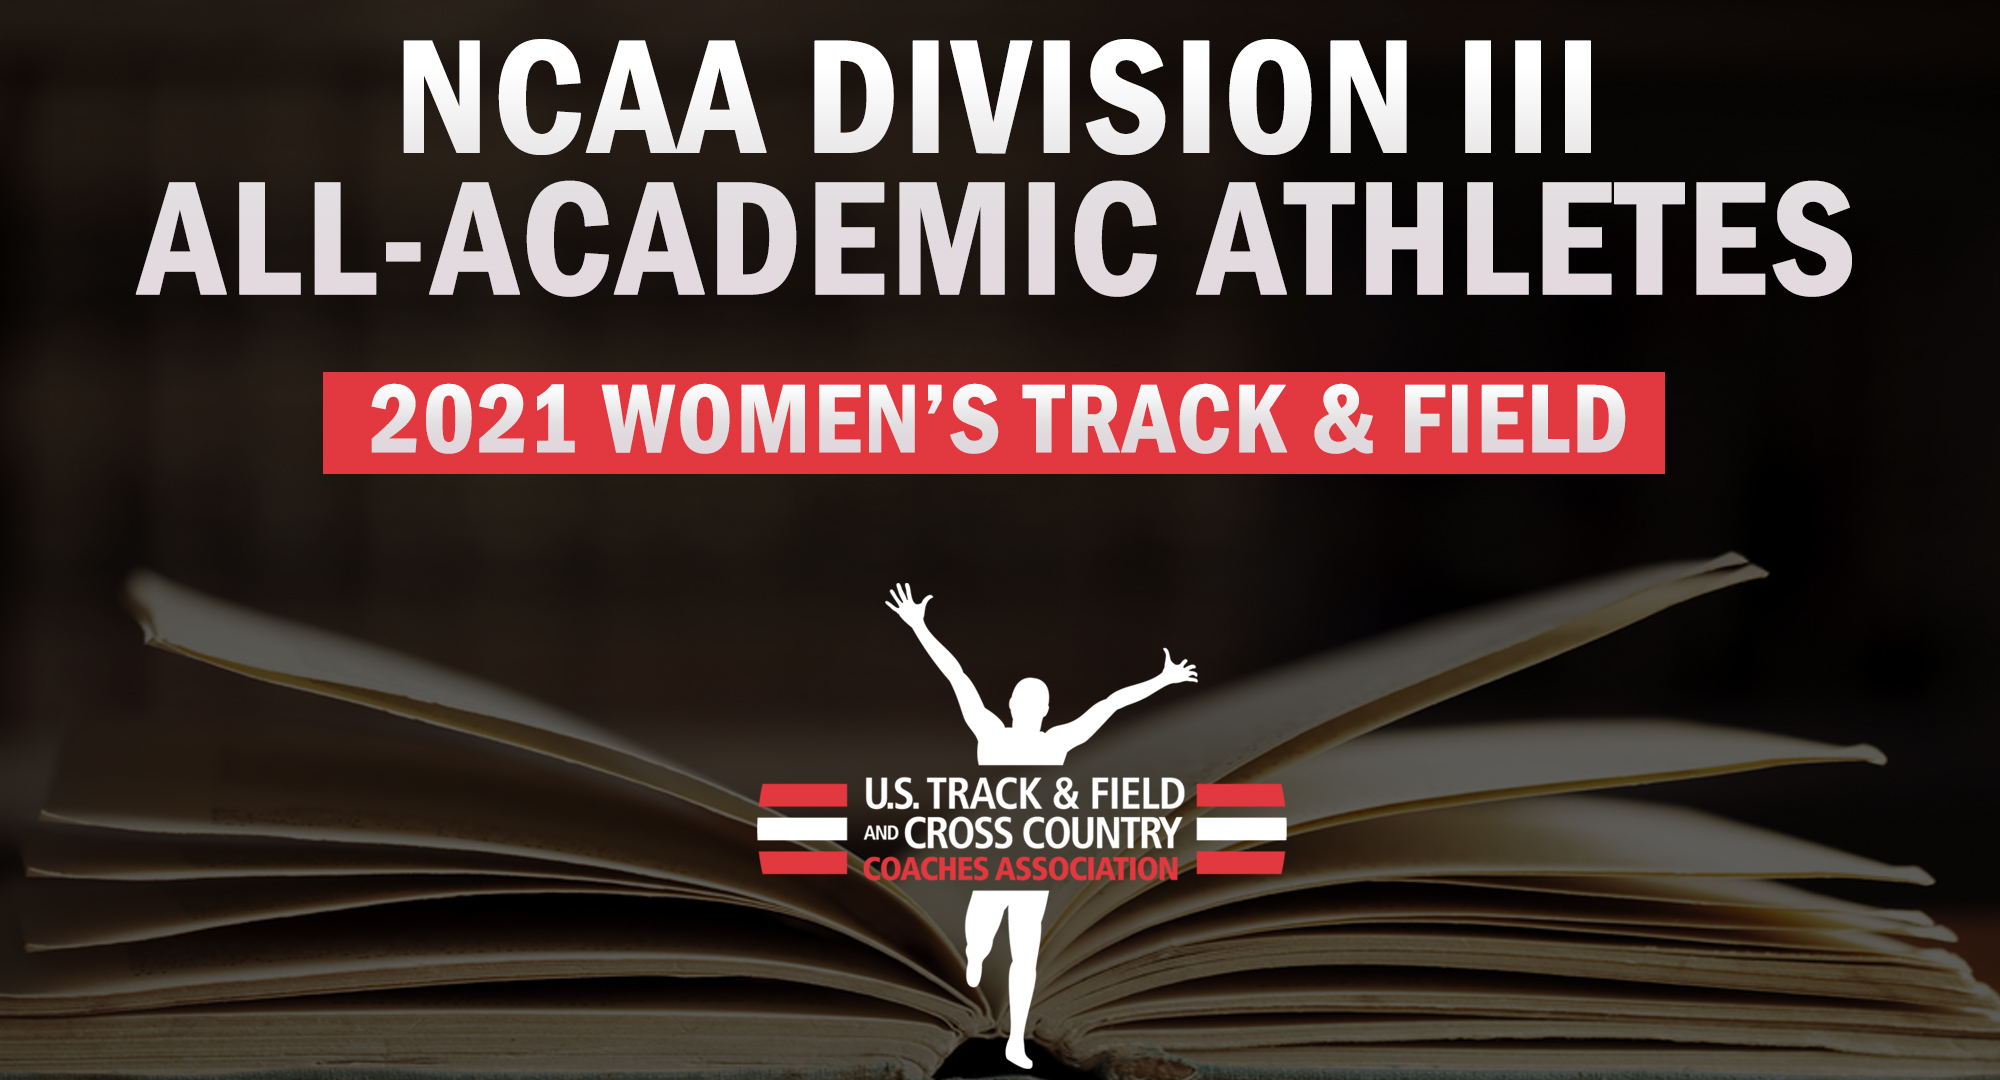 The Cobber women's track and field team earned USTFCCCA All-Academic Team honors and four student-athletes were honored with the individual award.